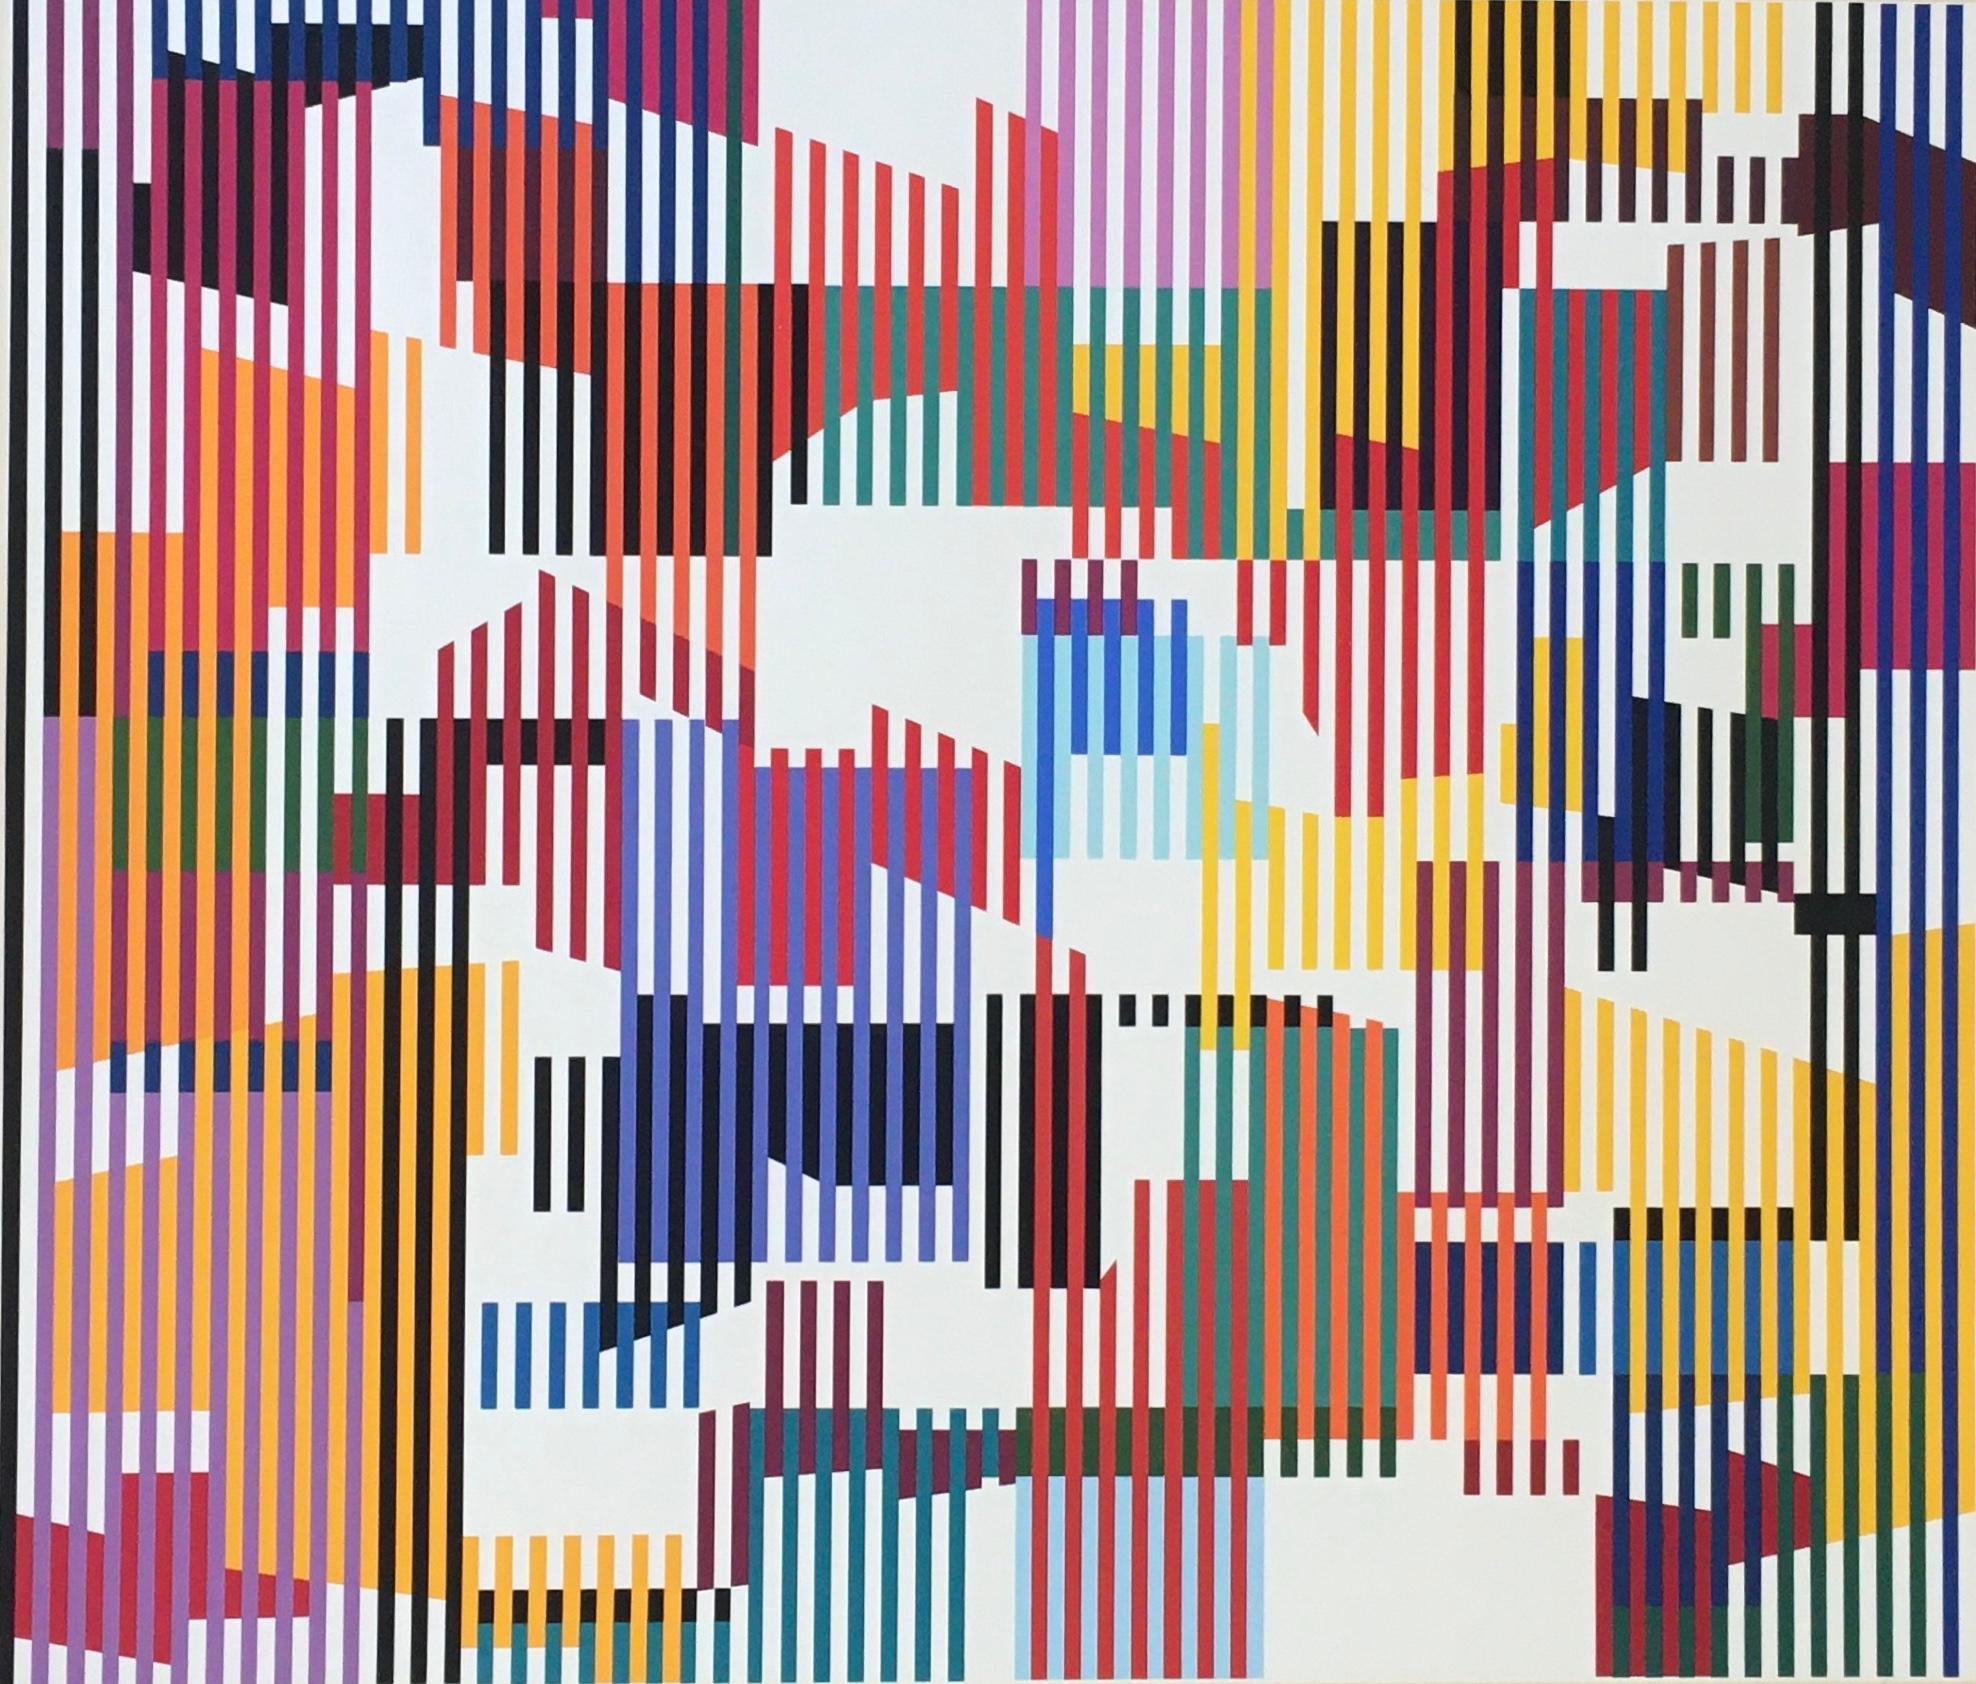 Yaacov Agam (Israeli, b. 1928)
Untitled
Serigraph screenprint in colors
Signed in pencil lower right and on the verso 
Numbered in pencil, edition 24/99
23 1/2 in H  x 27 1/4 in L.